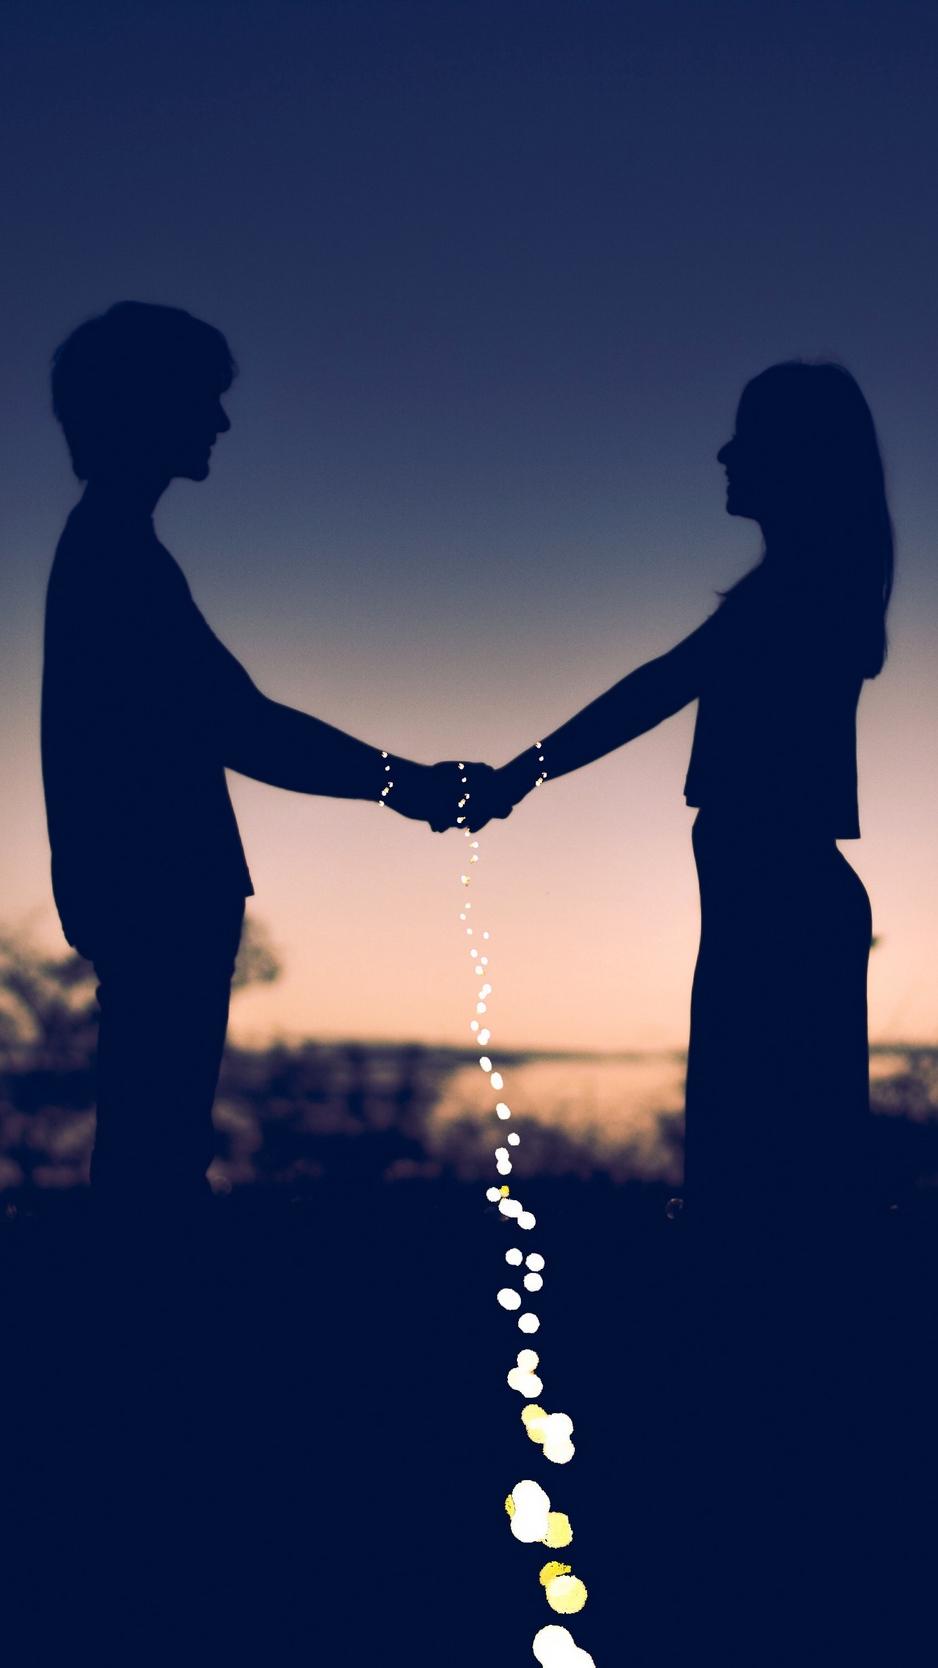 Download wallpaper 938x1668 couple, love, silhouettes, happiness